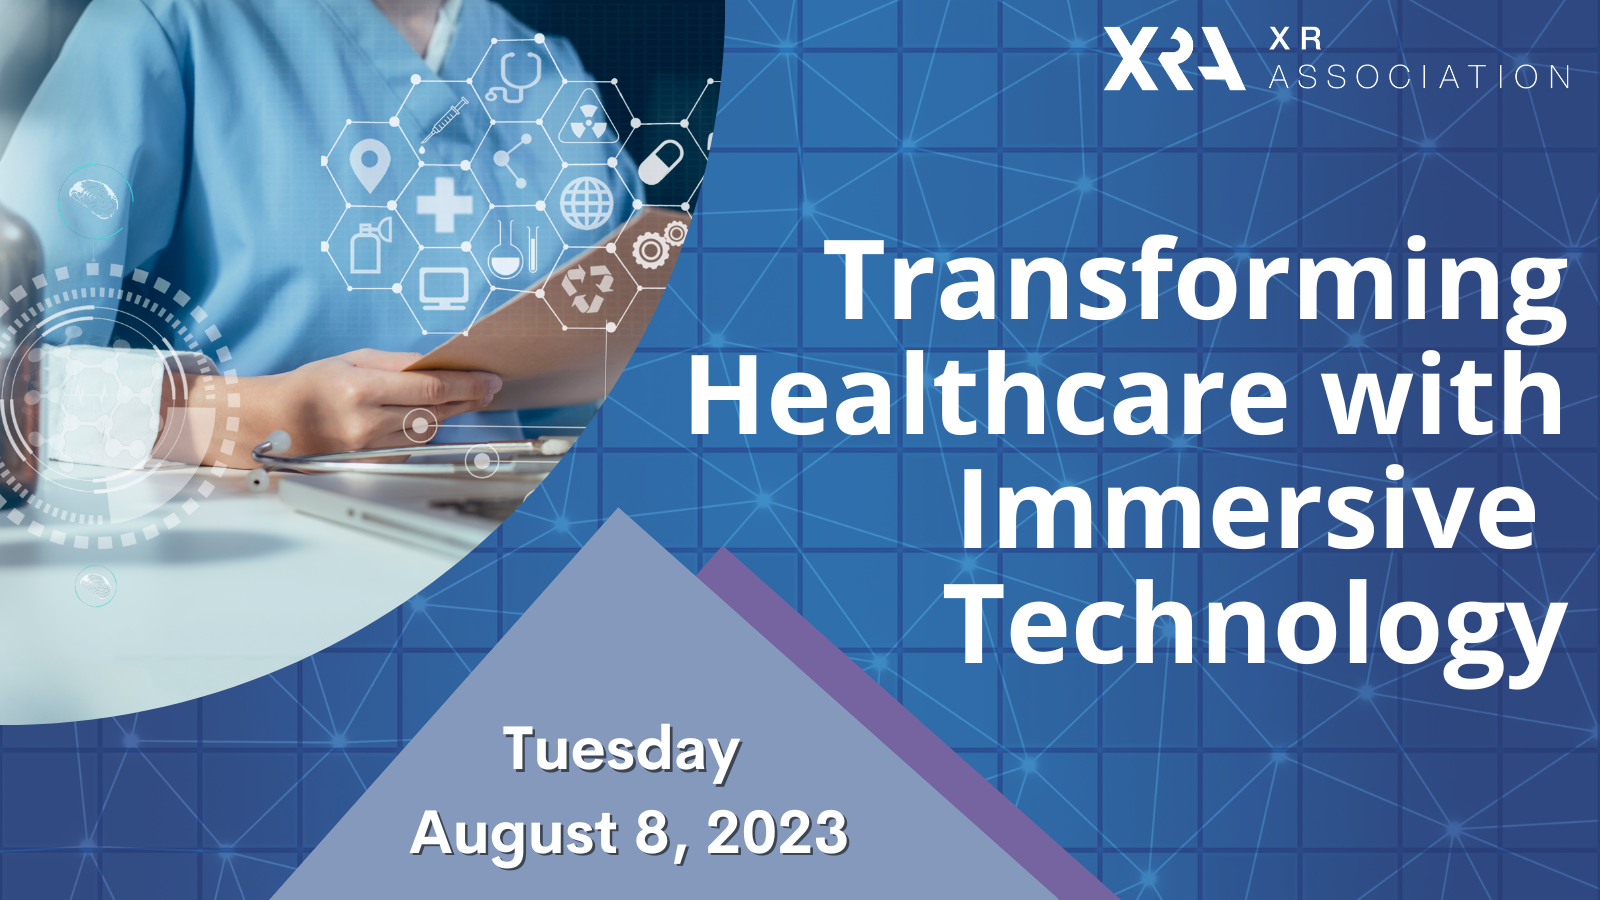 XR ASSOCIATION TO HOST HEALTHCARE WORKSHOP IN PARTNERSHIP WITH ELM PARK LABS AND CLEANBOX TECHNOLOGY